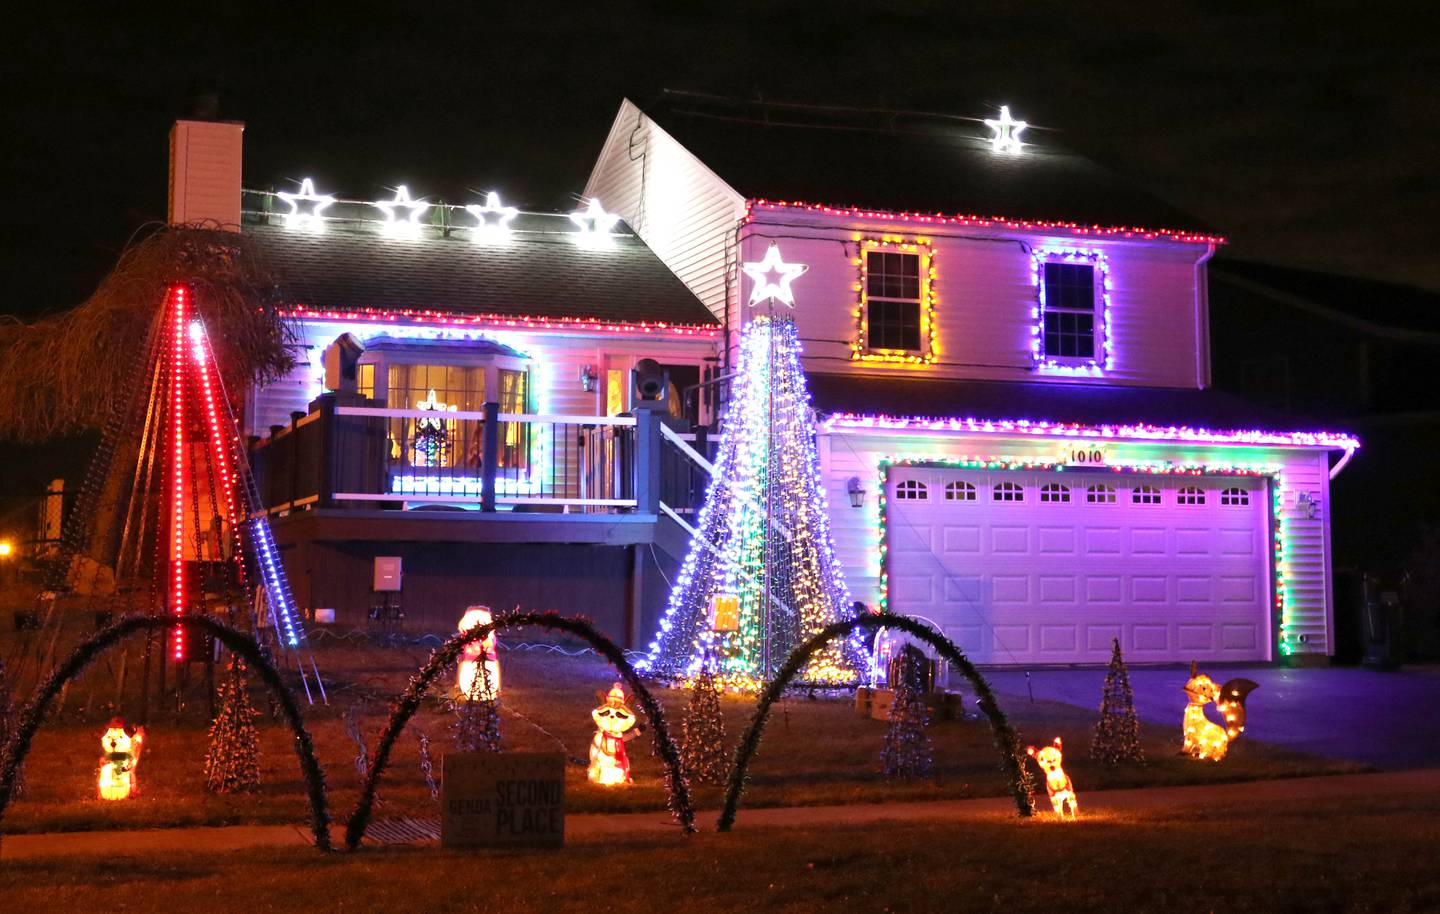 Many homes in DeKalb County were all decked out for the holidays like this one at 1010 South Oak Creek Drive in Genoa which won second place in the Genoa Area Chamber of Commerce Holiday Light Competition.